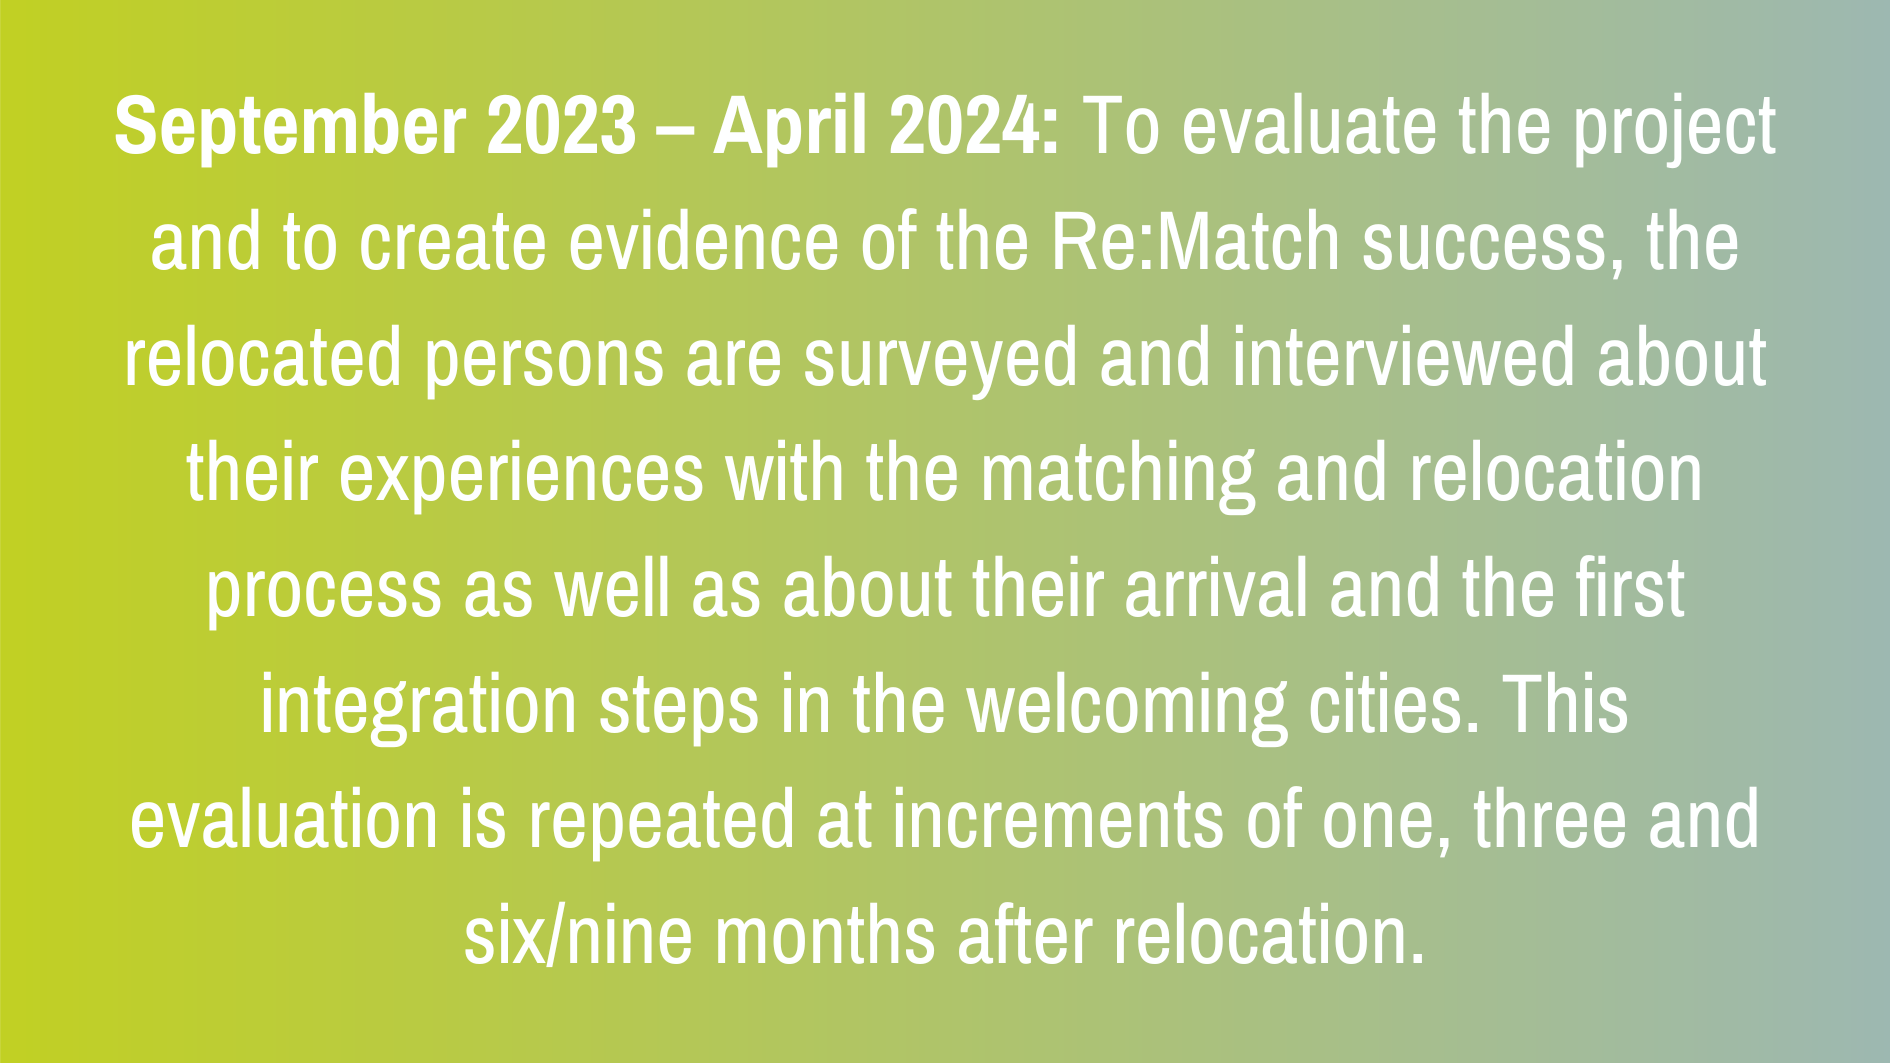 September 2023 – April 2024: To evaluate the project and to create evidence of the Re:Match success, the relocated persons are surveyed and interviewed about their experiences with the matching and relocation process as well as about their arrival and the first integration steps in the welcoming cities. This evaluation is repeated at increments of one, three and six/nine months after relocation.